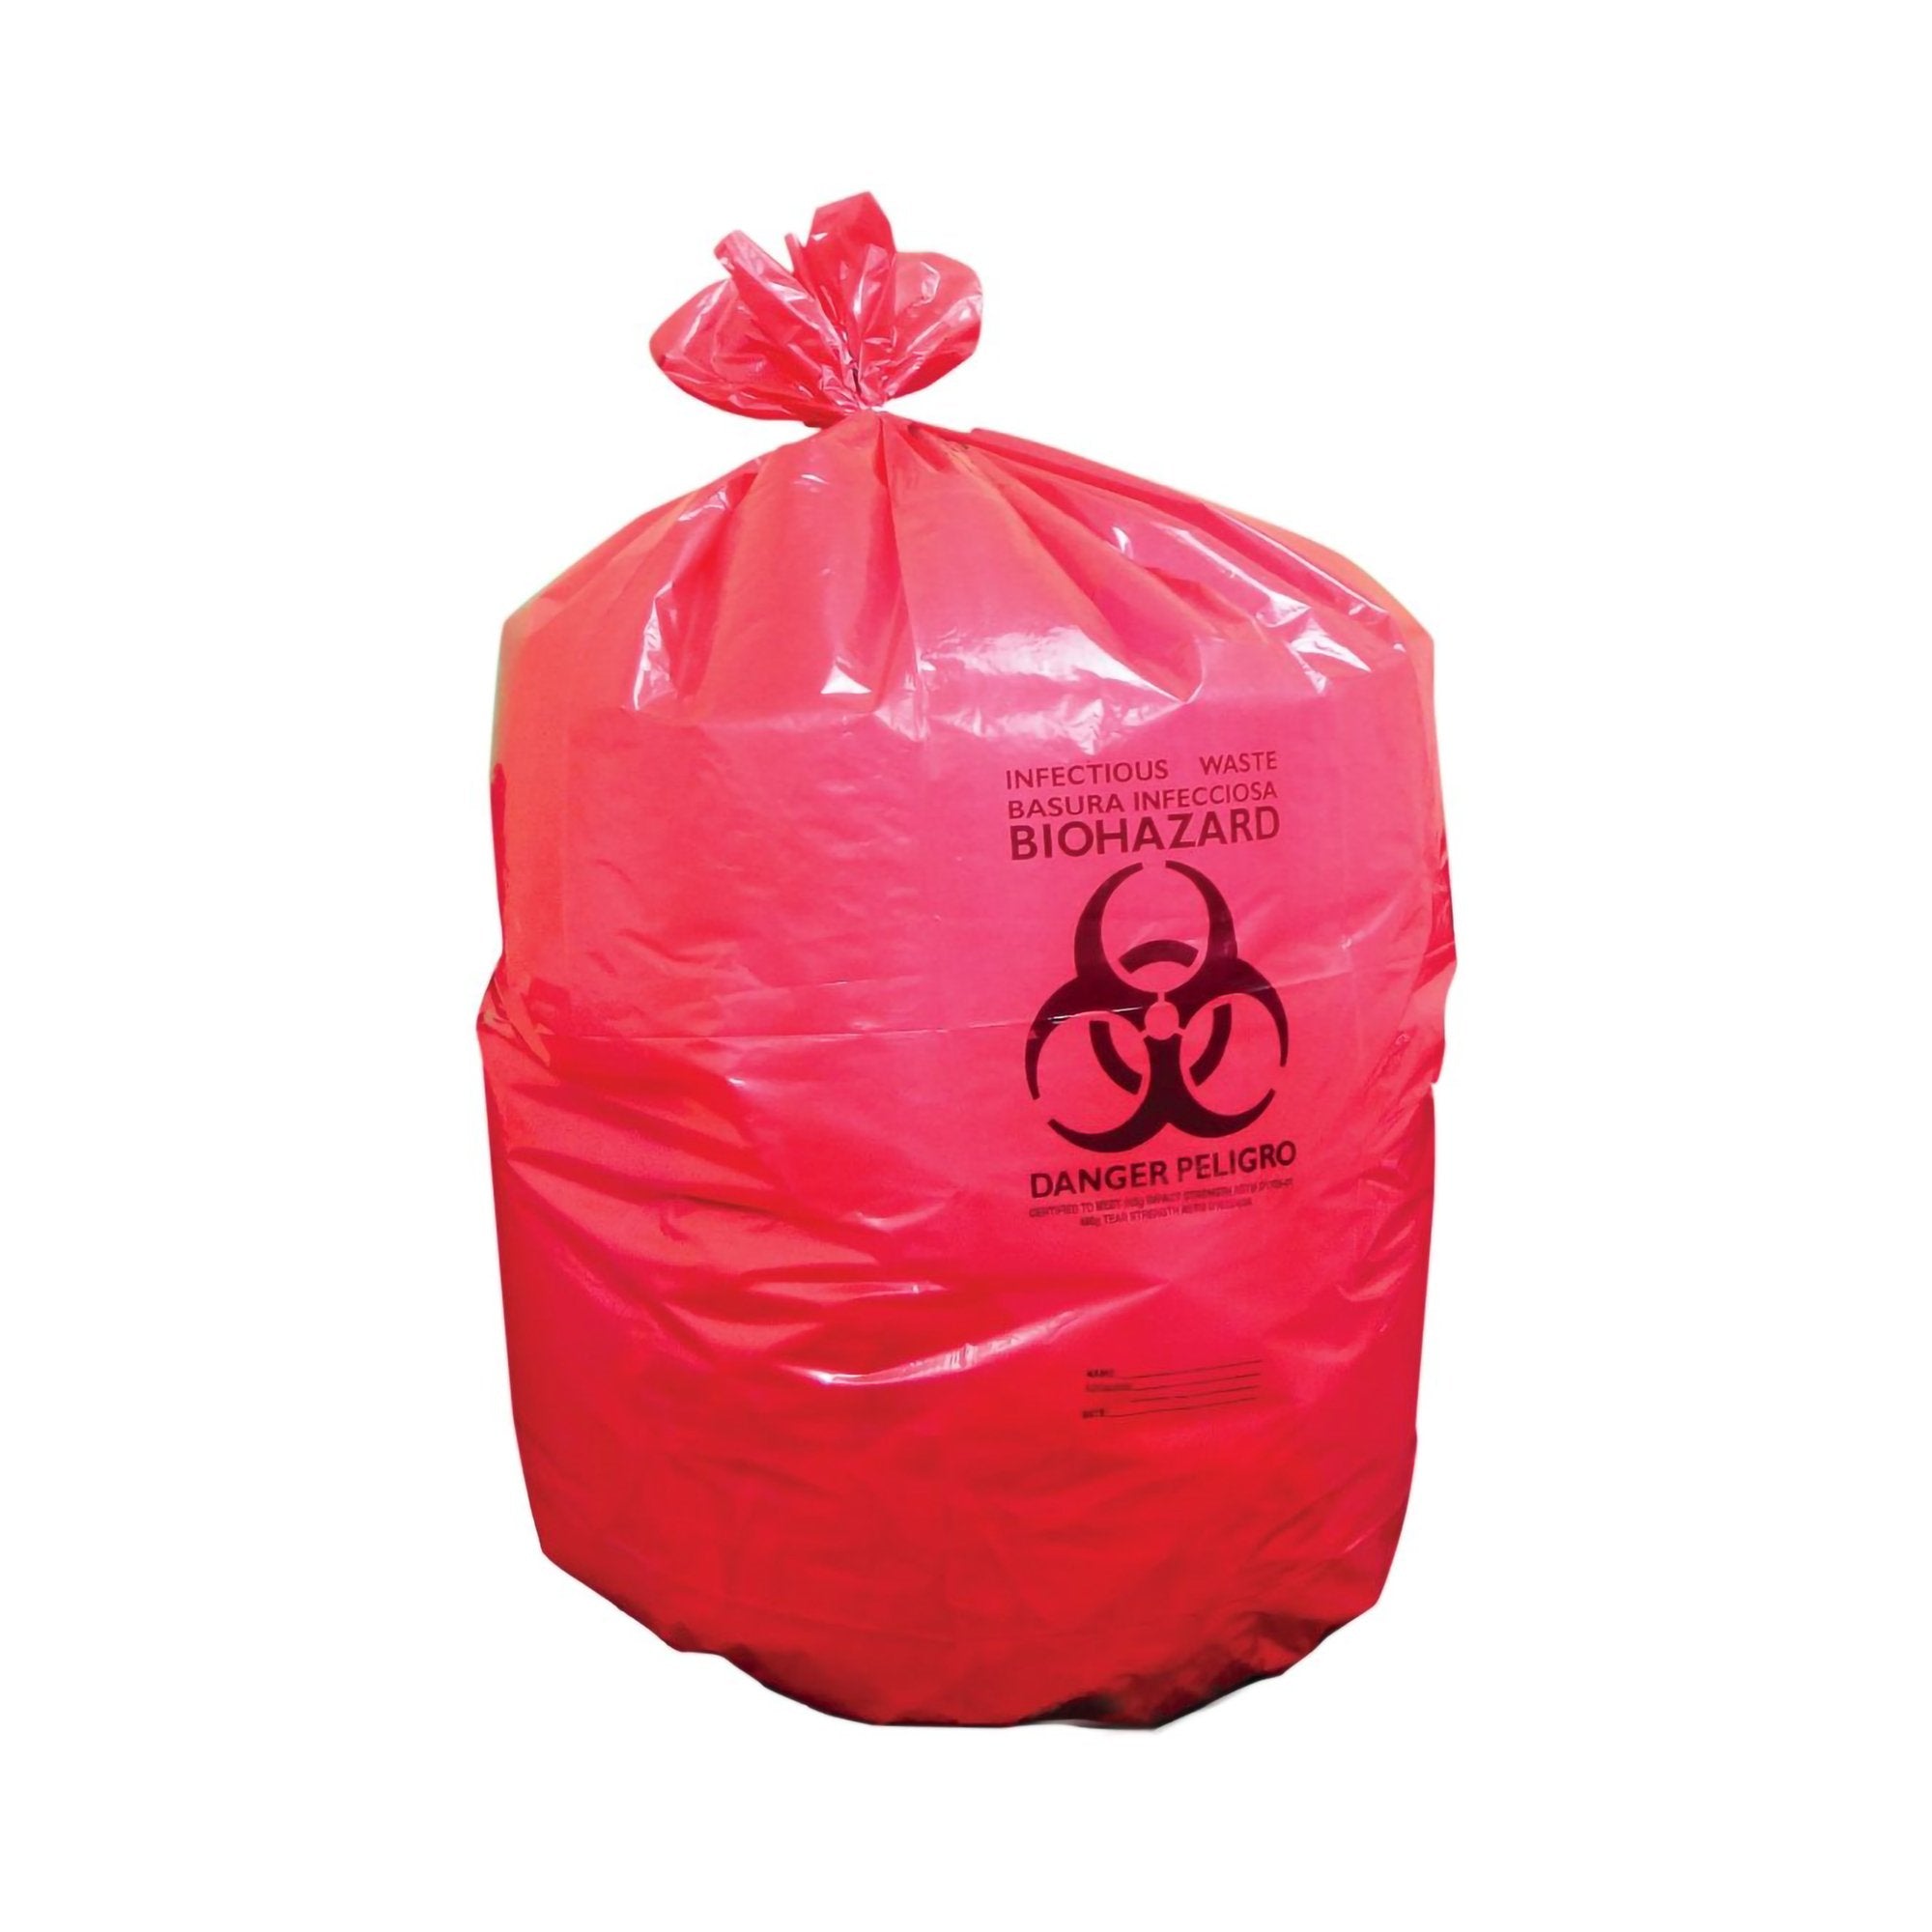 Infectious Waste Bag 40 to 45 gal. Red Bag Plastic 40 X 46 Inch